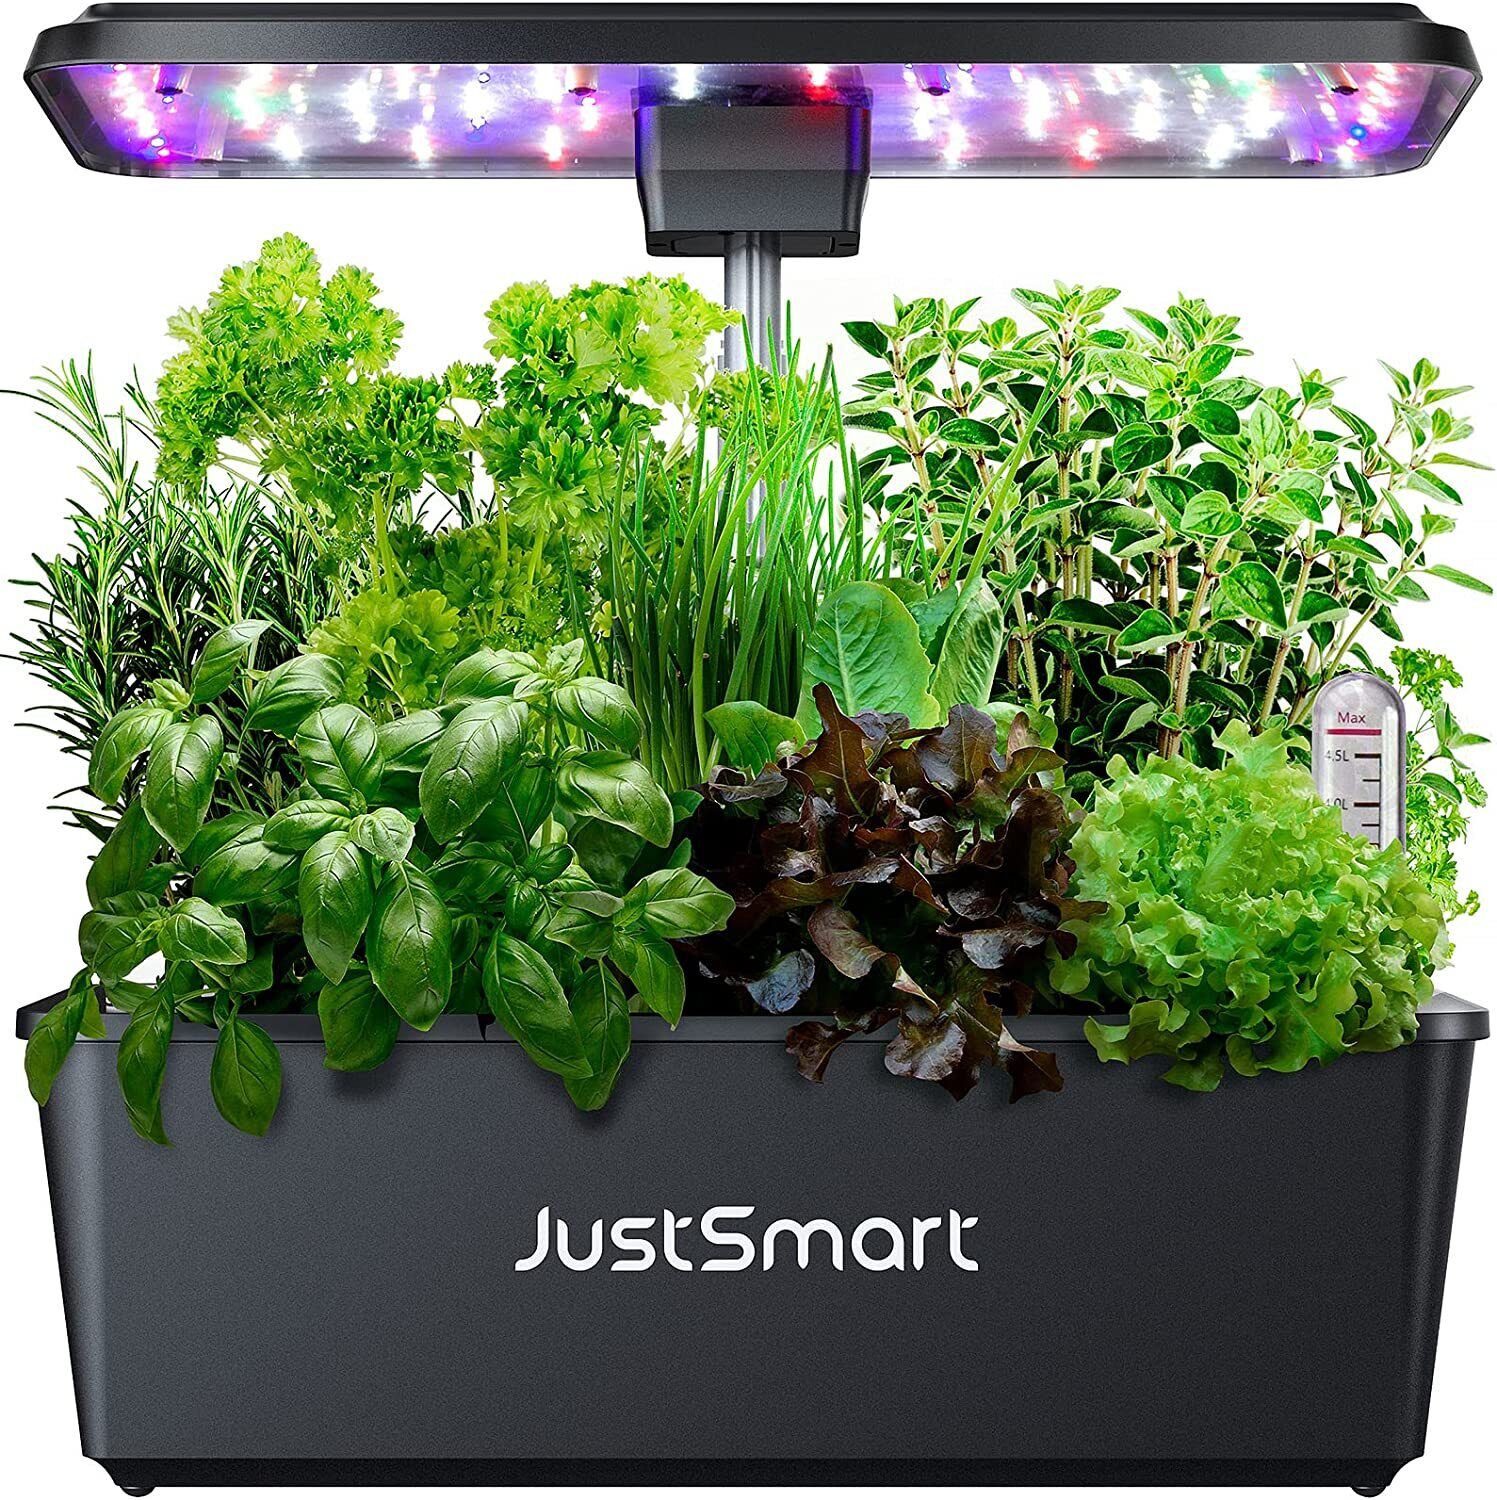 12Pods Hydroponics Growing System with Grow Light Plants 100LED Home Herb Garden